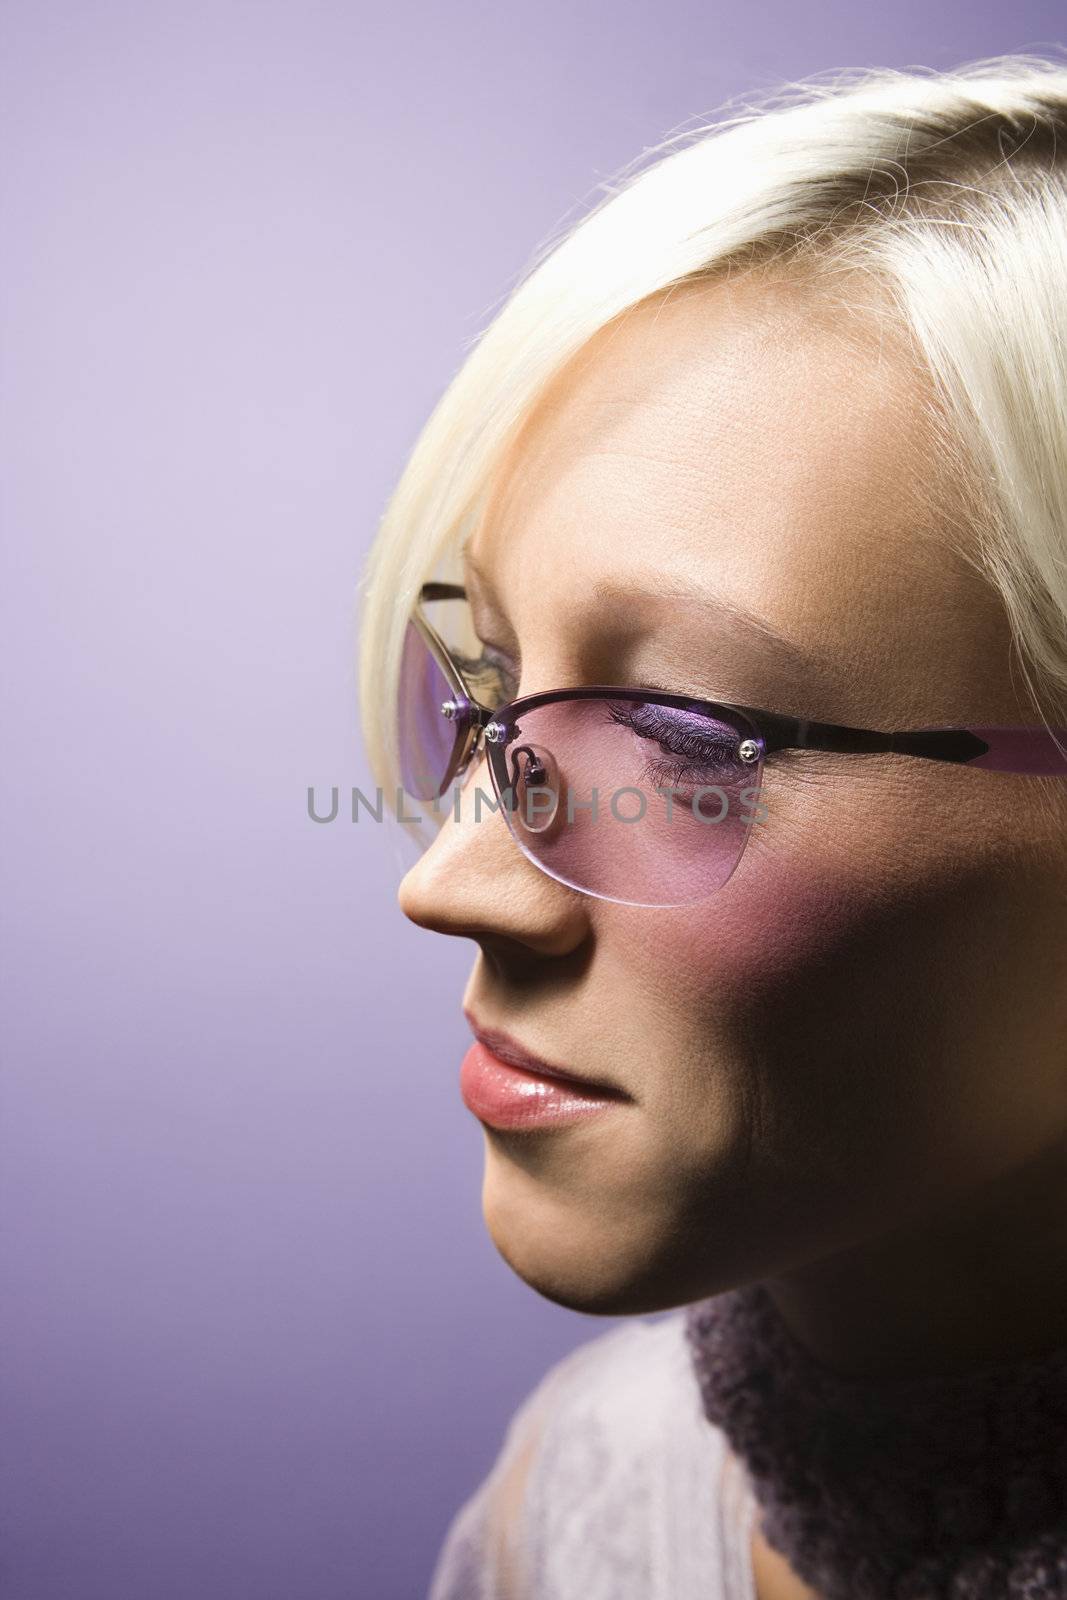 Close-up side view portrait of young adult Caucasian woman on purple background wearing sunglasses.